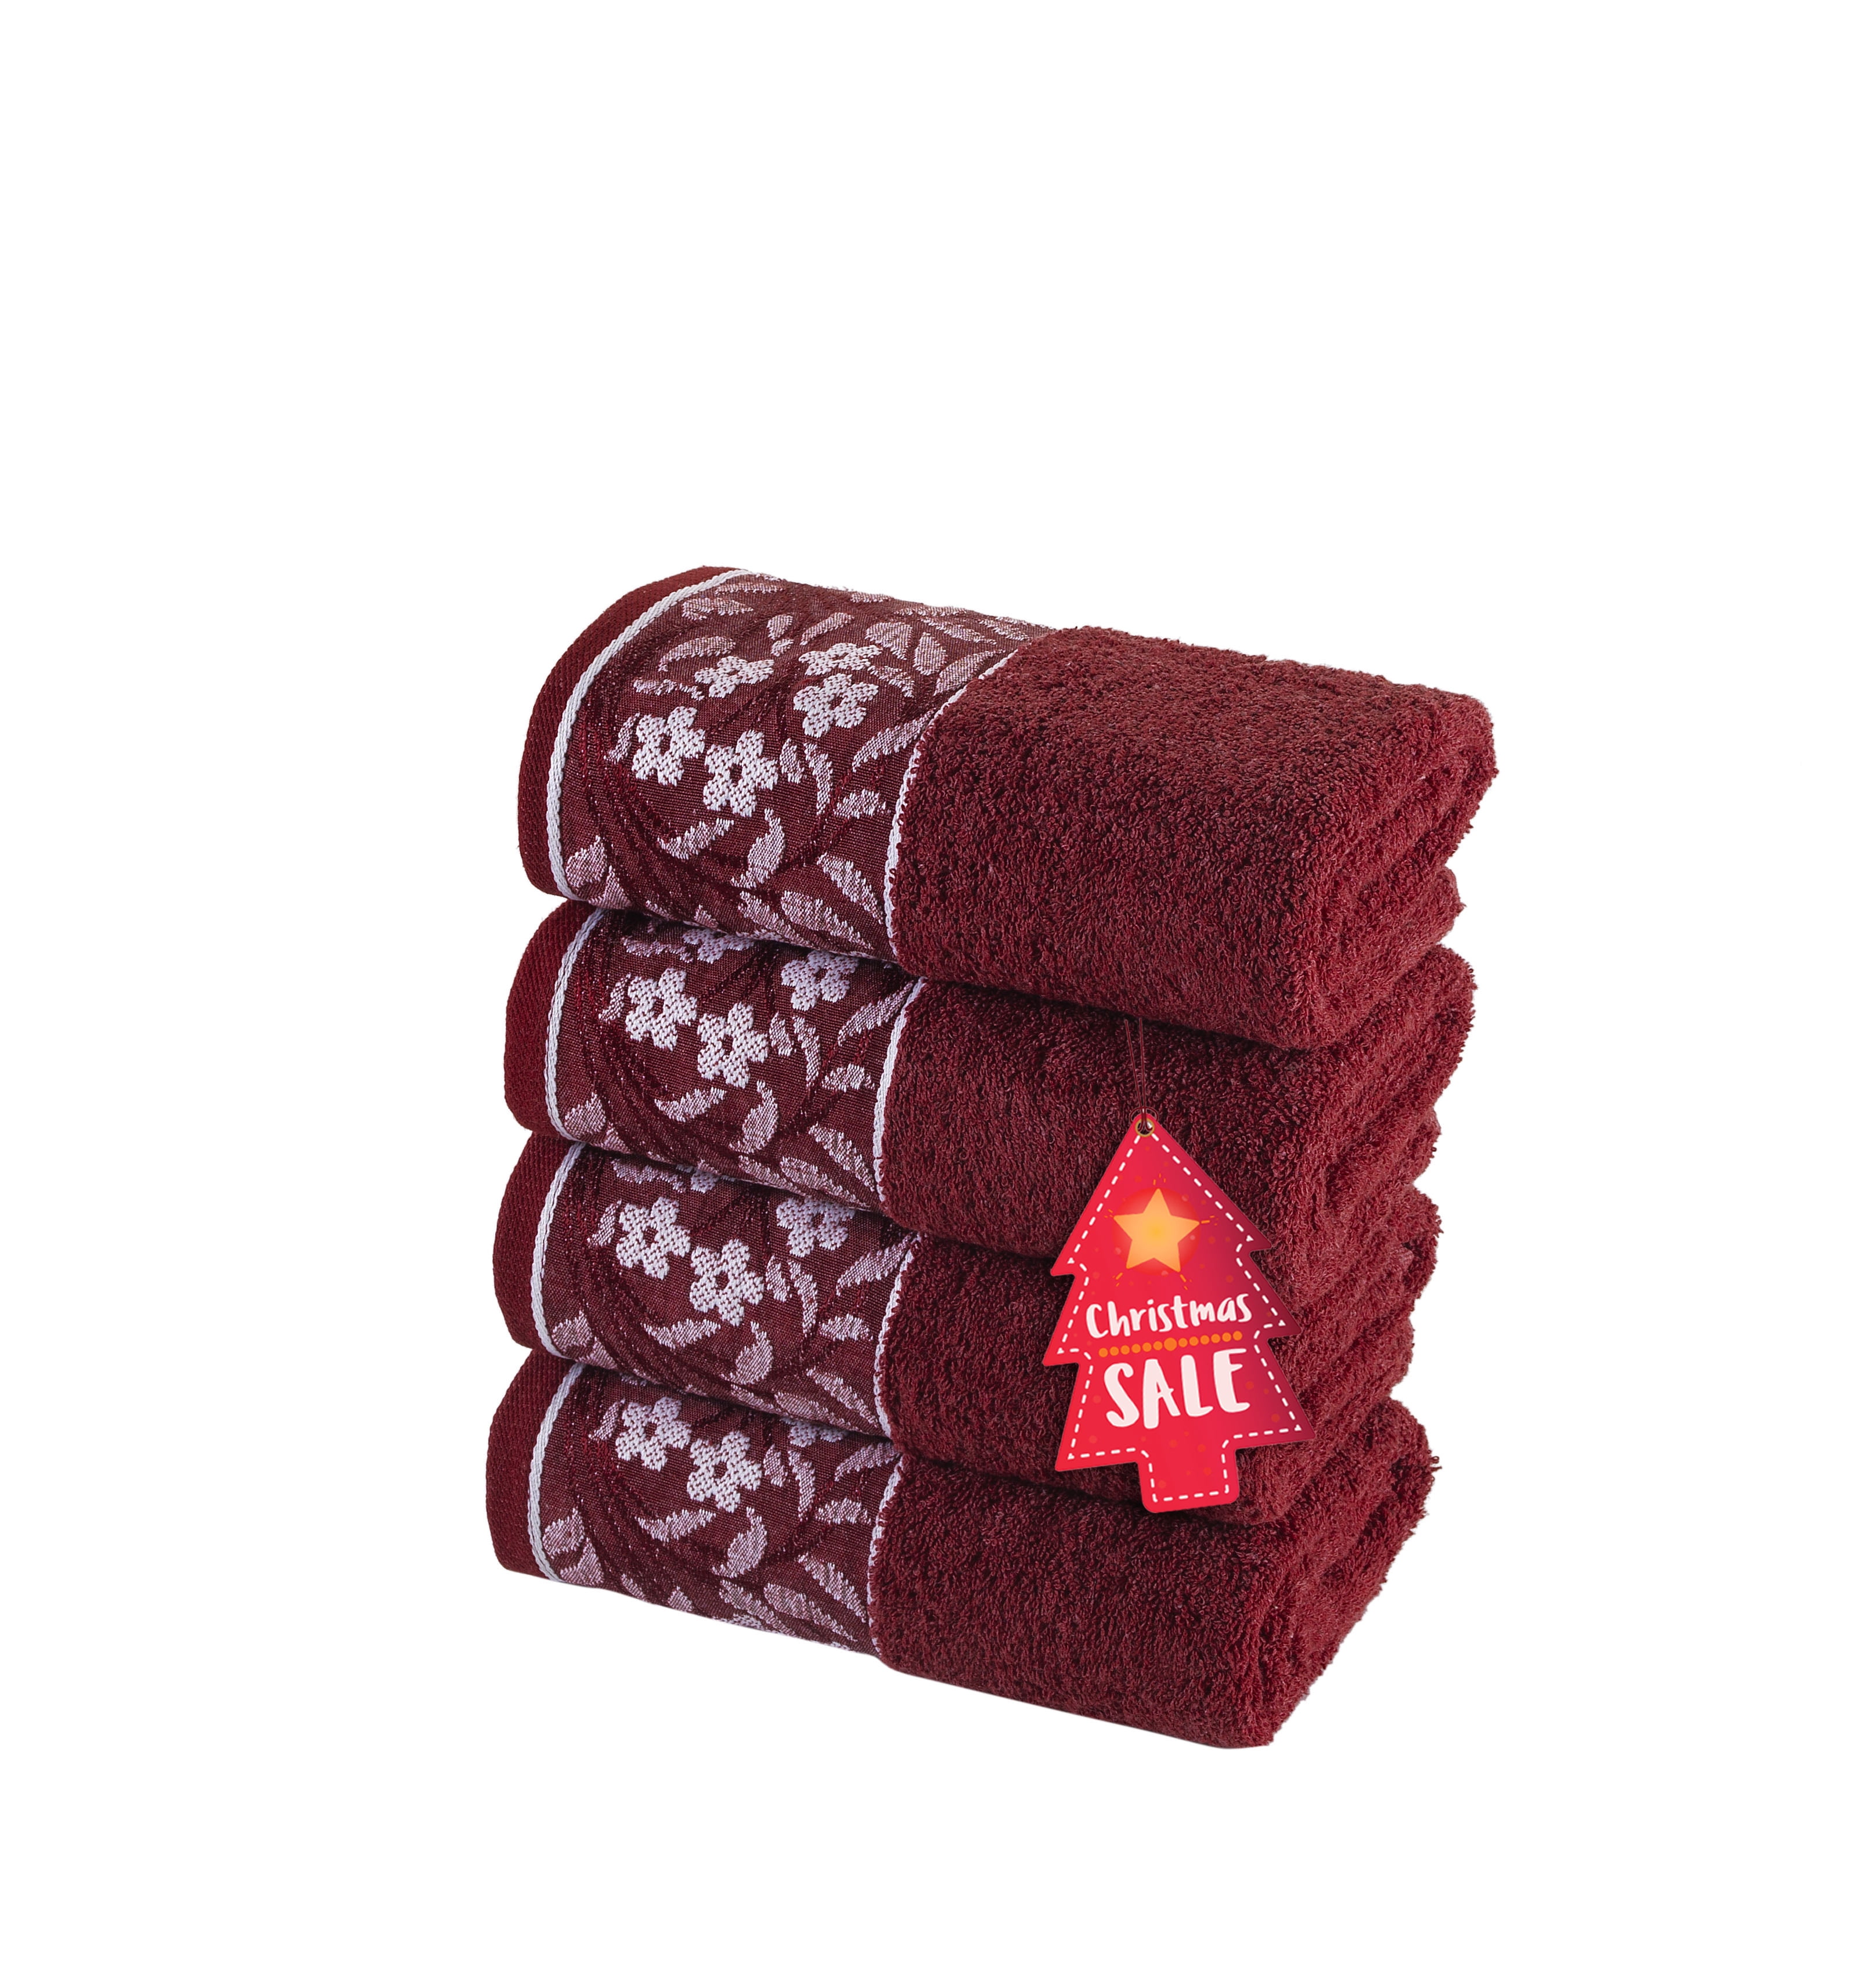 Luxury Hand Towels (Set of 2) – Thomas Lee Sheets